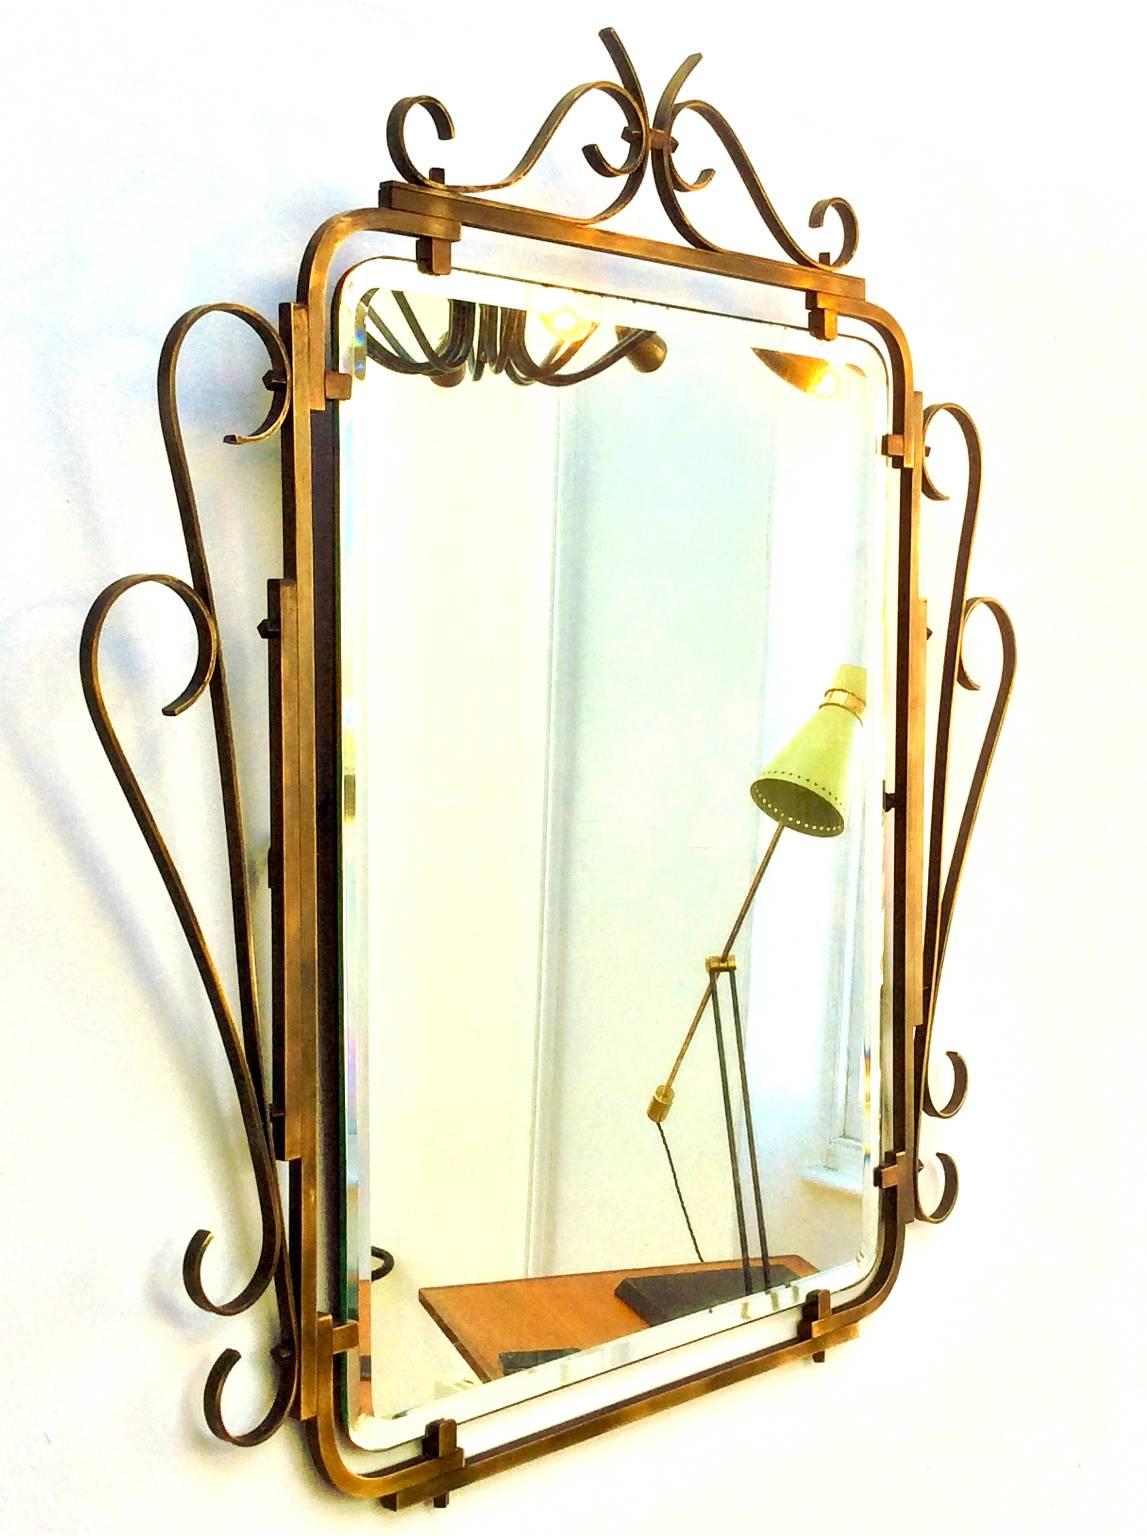 Wall mirror with bevelled glass and decorative brass frame. Mid-20th century, Art Deco style, European.  

The frame is nicely engineered, with small square nuts and screws holding the brass together.  A heavy piece with hanging chain.  The frame